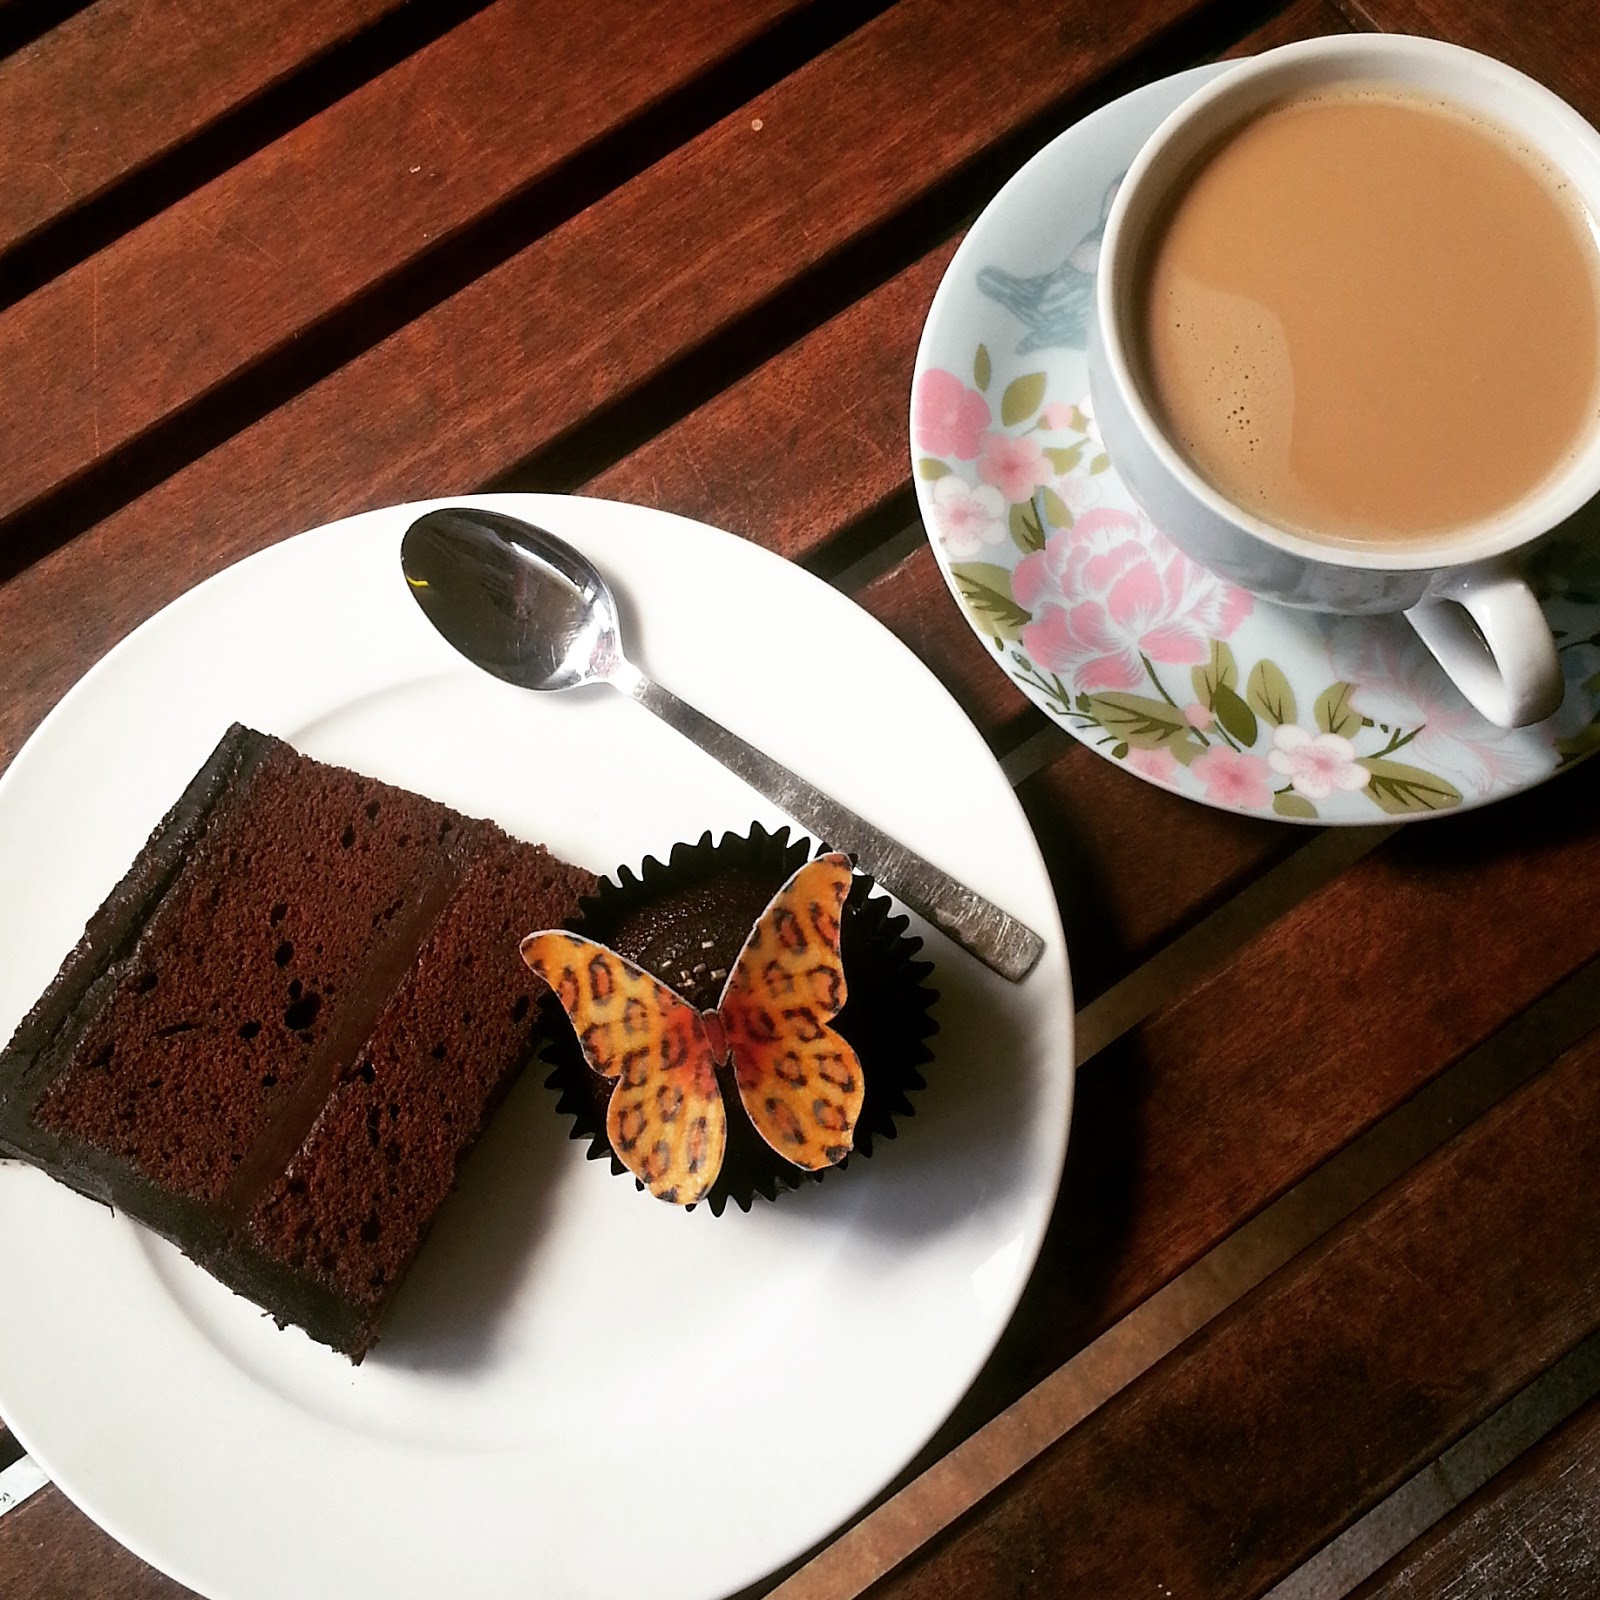 A slice of chocolate cakes, edible leopard print butterfly cupcake and a cup of nespresso coffee.